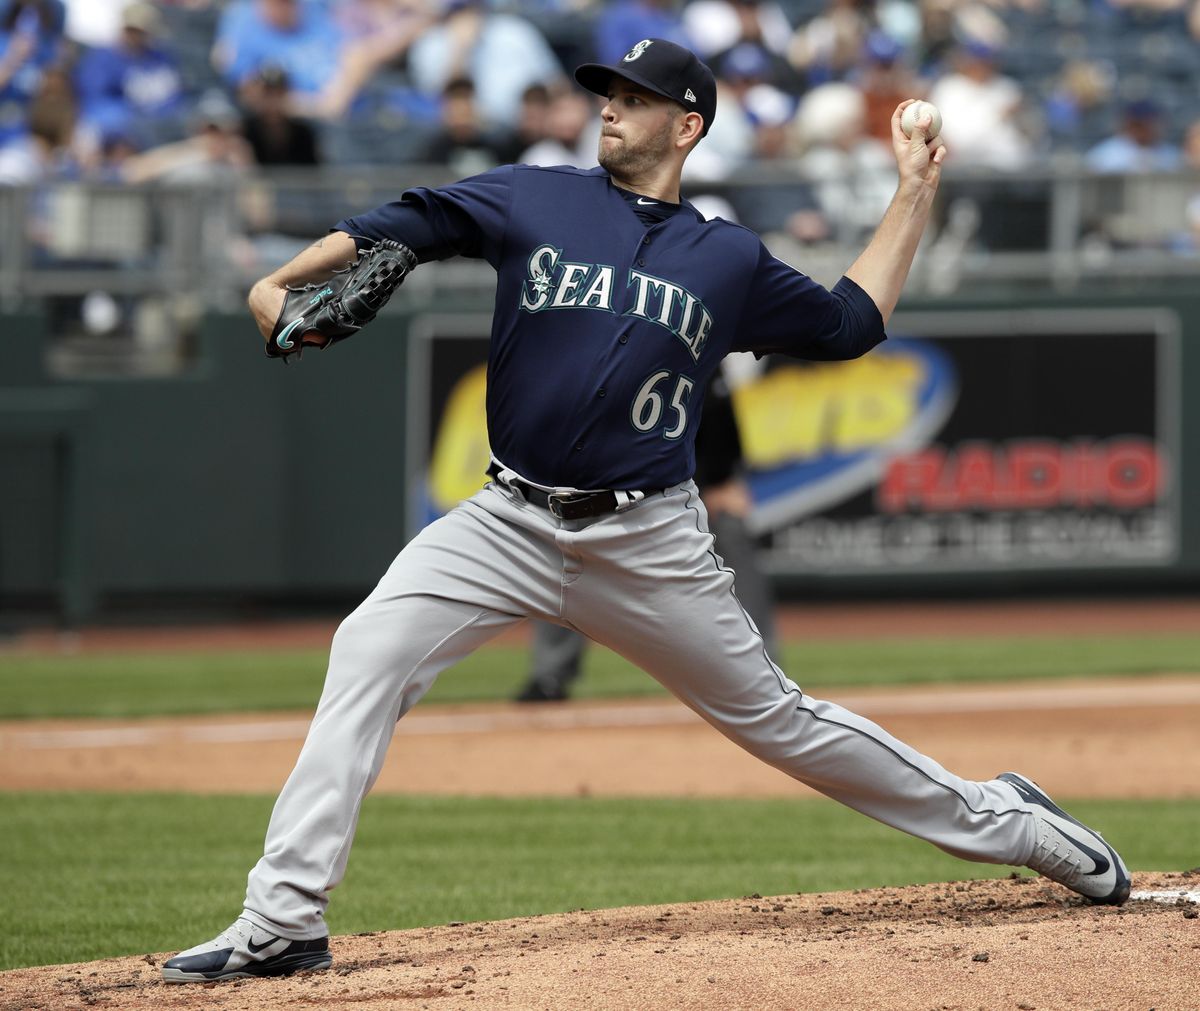 Seattle Mariners starting pitcher James Paxton delivers to a Kansas City  batter during the first inning Wednesday  at Kauffman Stadium in Kansas City, Missouri. (Orlin Wagner / AP)